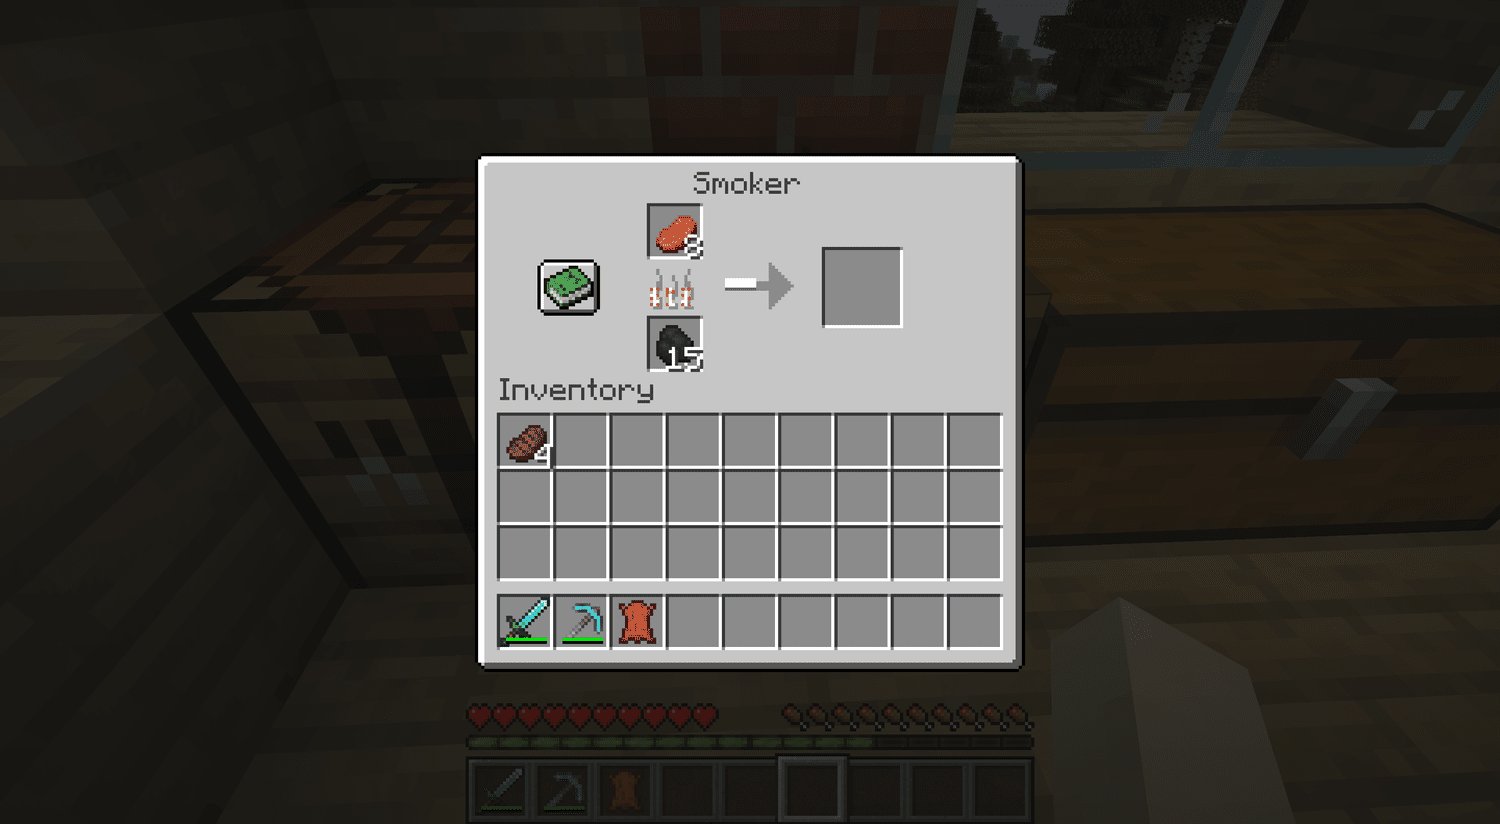 How To Make A Smoker Recipe In Minecraft